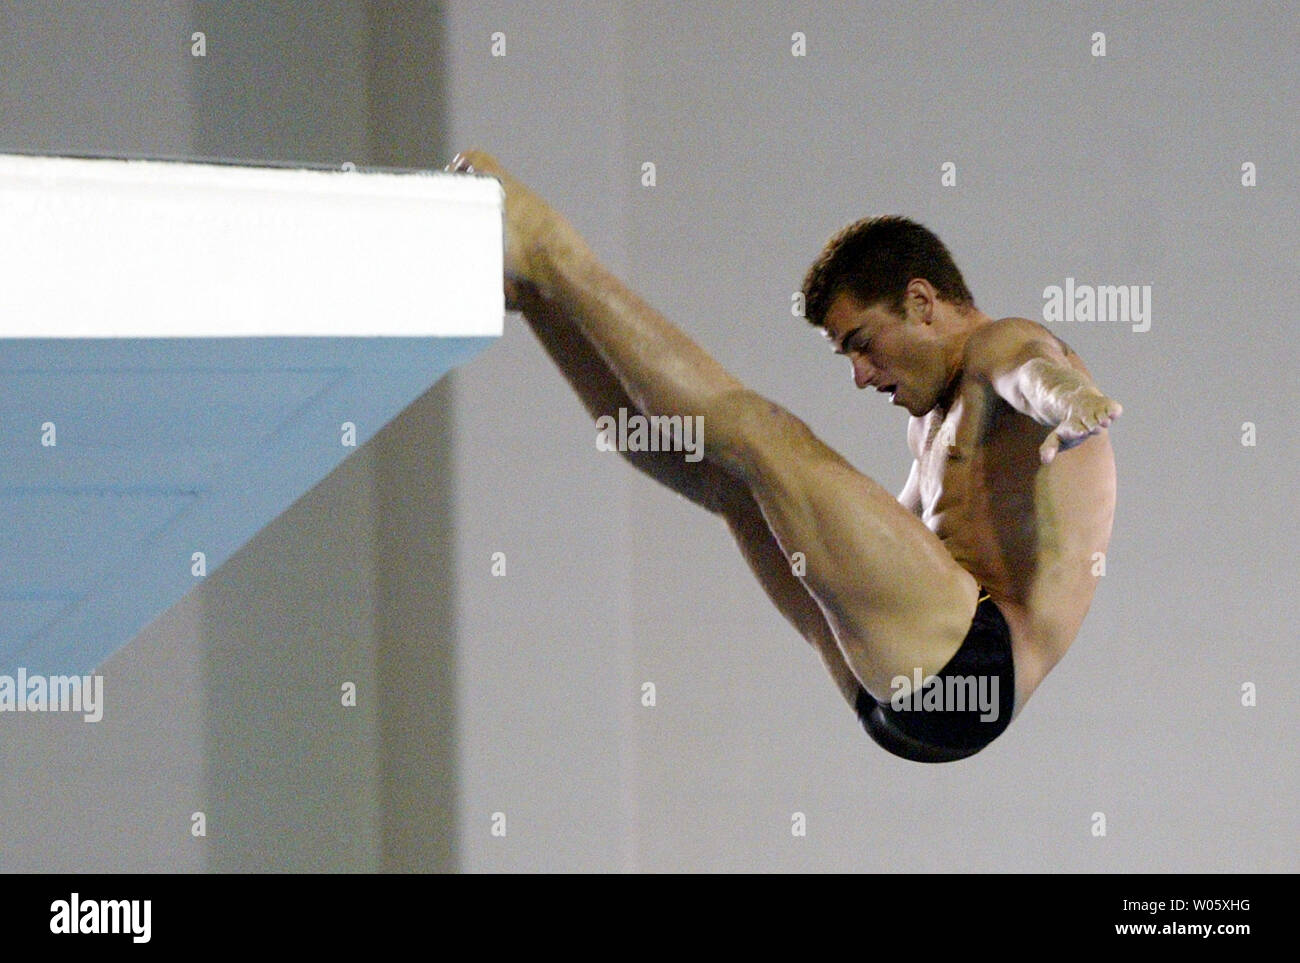 Diver Ray Vincent of Lake Forest, CA., falls backwards as he  performs his dive from the 10-meter platform during the men's platform semi-finals of the 2004 U.S. Olympics Team Trials Diving at the St. Peters Rec-Plex in St. Peters, Mo on June 7, 2004. (UPI Photo/Bill Greenblatt) Stock Photo